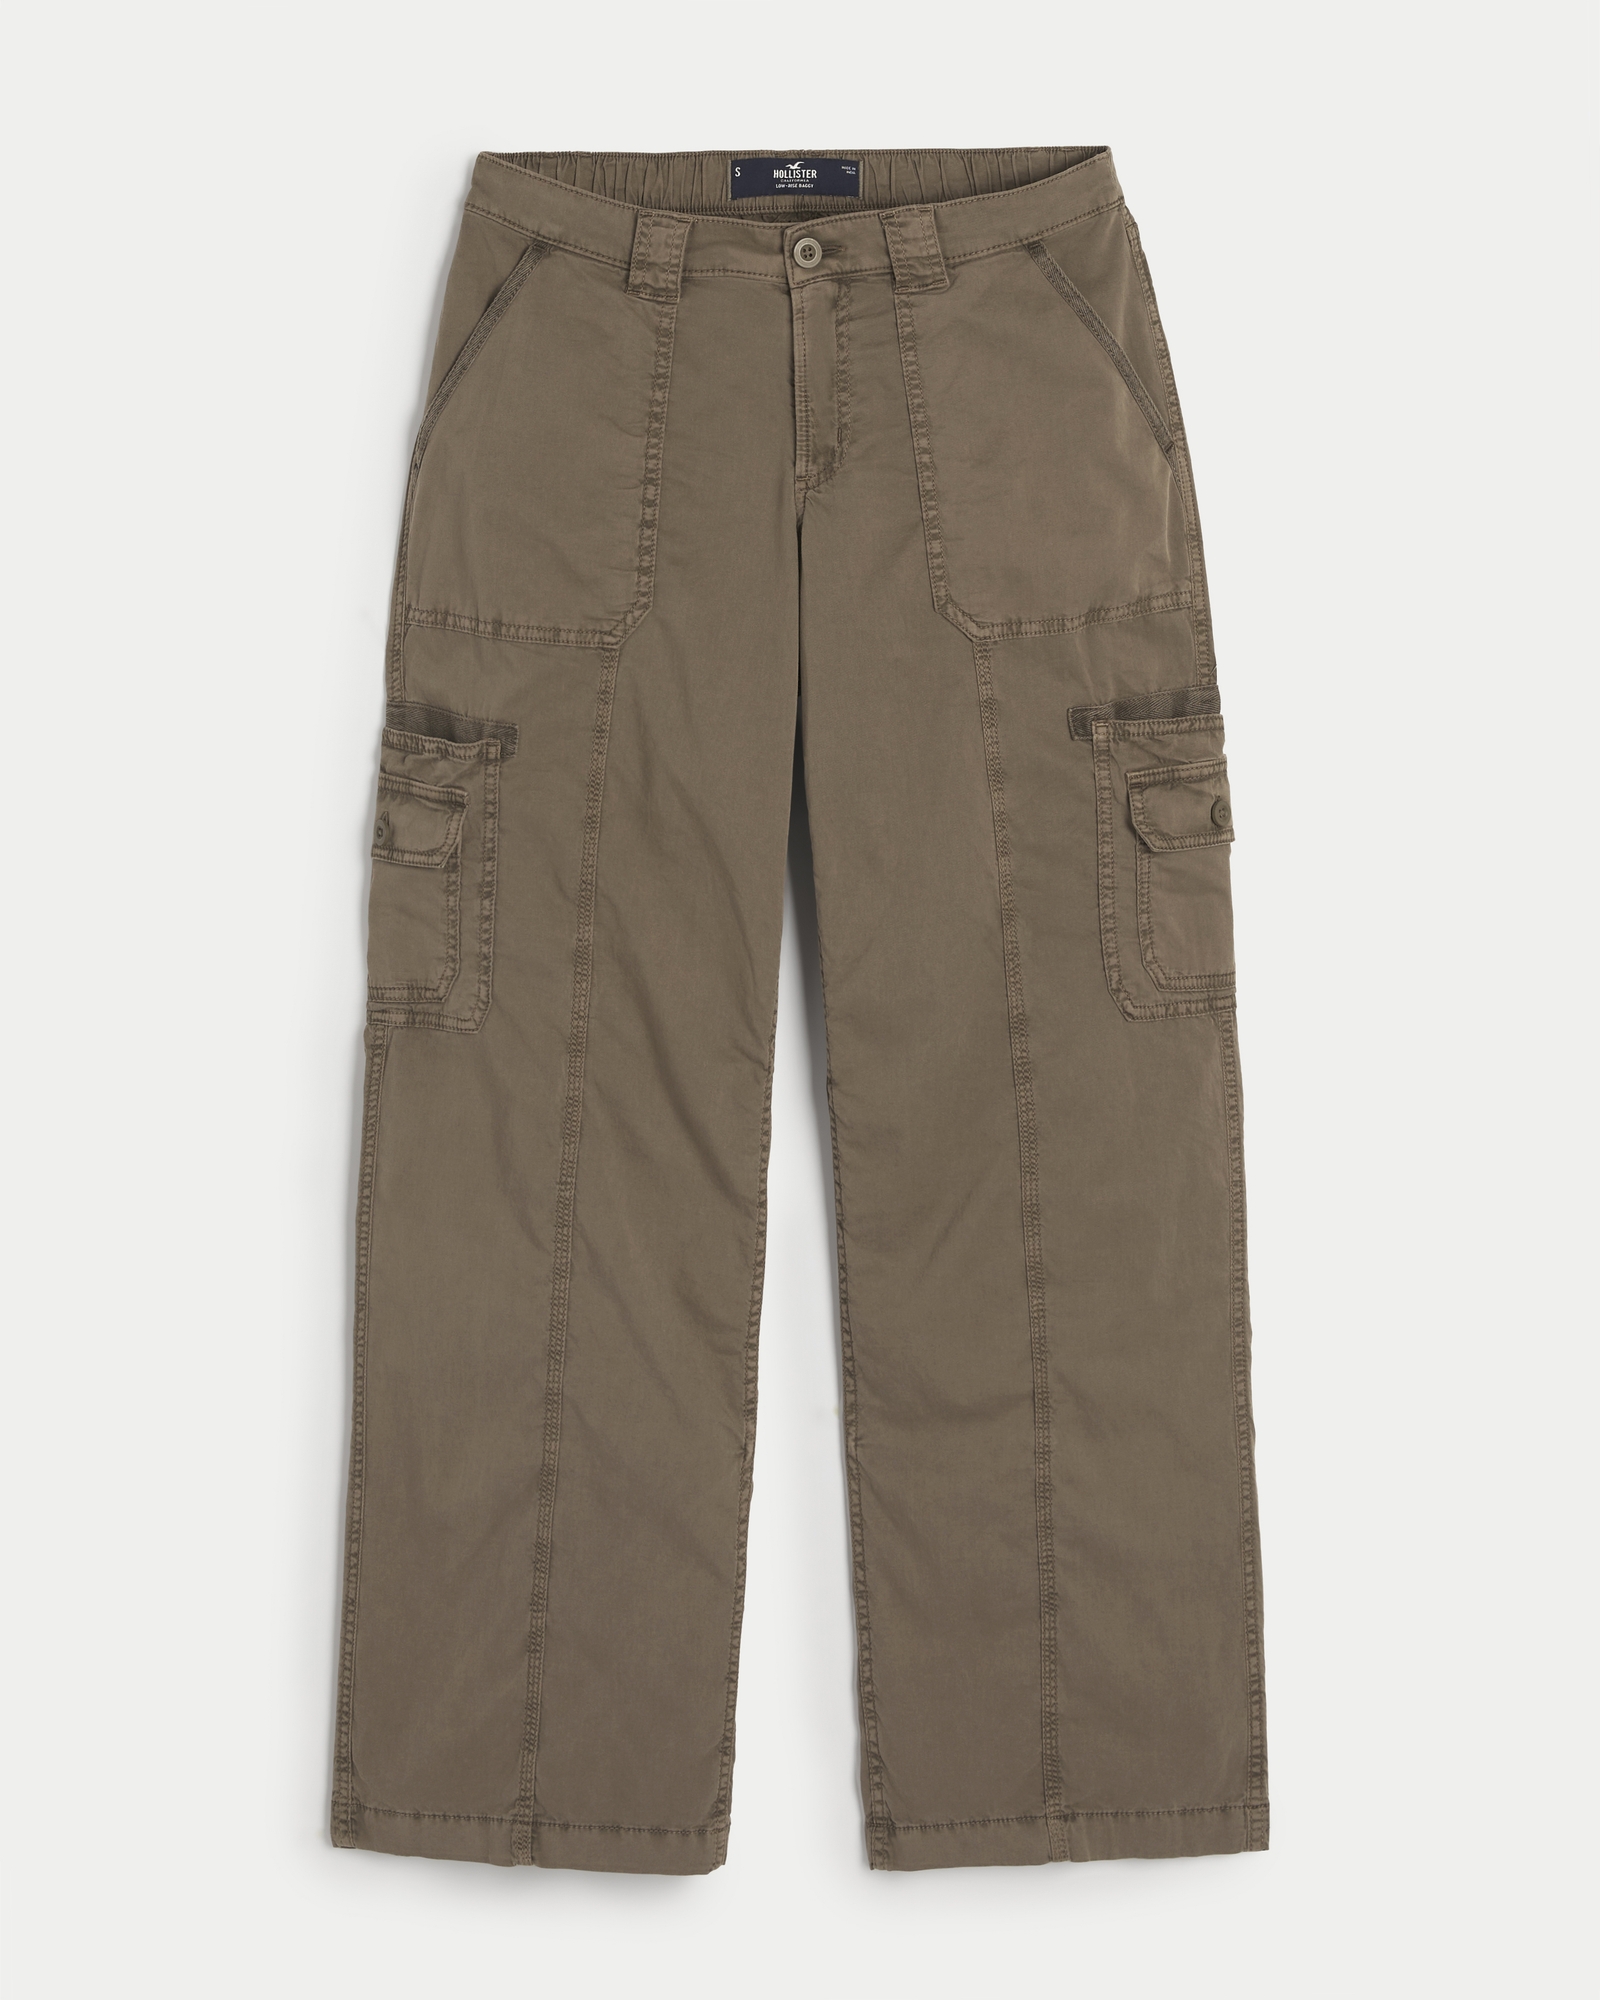 https://img.hollisterco.com/is/image/anf/KIC_356-3089-0035-332_prod1.jpg?policy=product-extra-large